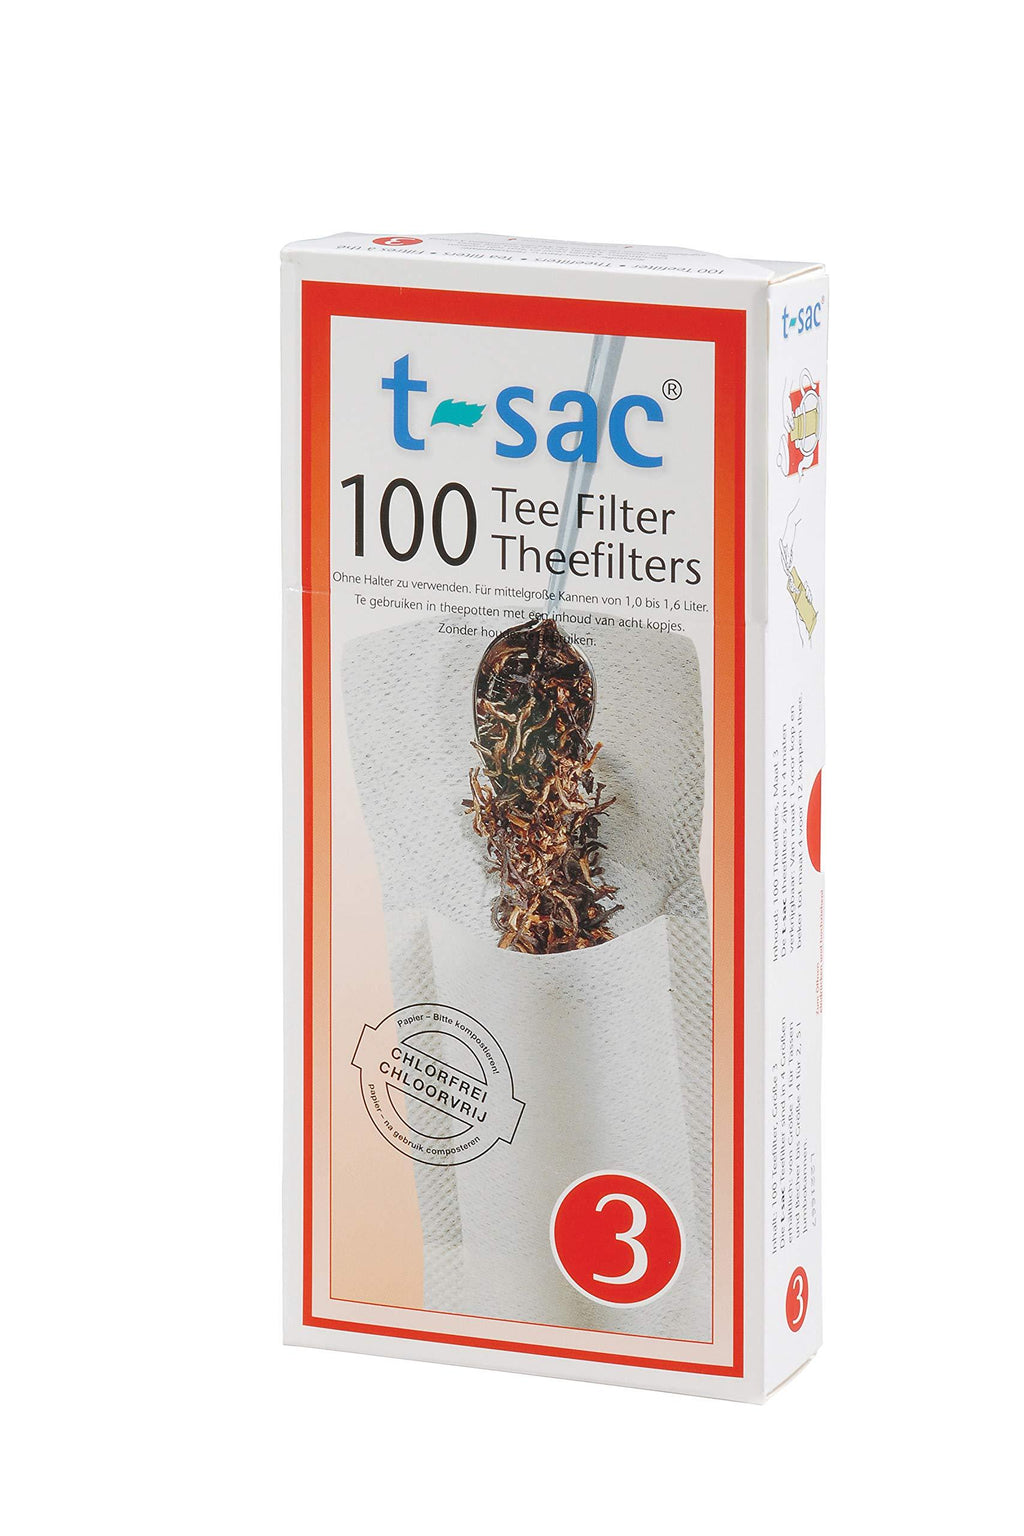 T-Sac Tea Filter Bags, Disposable Tea Infuser, Number 3-Size, 3 to 8-Cup Capacity, Set of 100 # 3, 100 Count